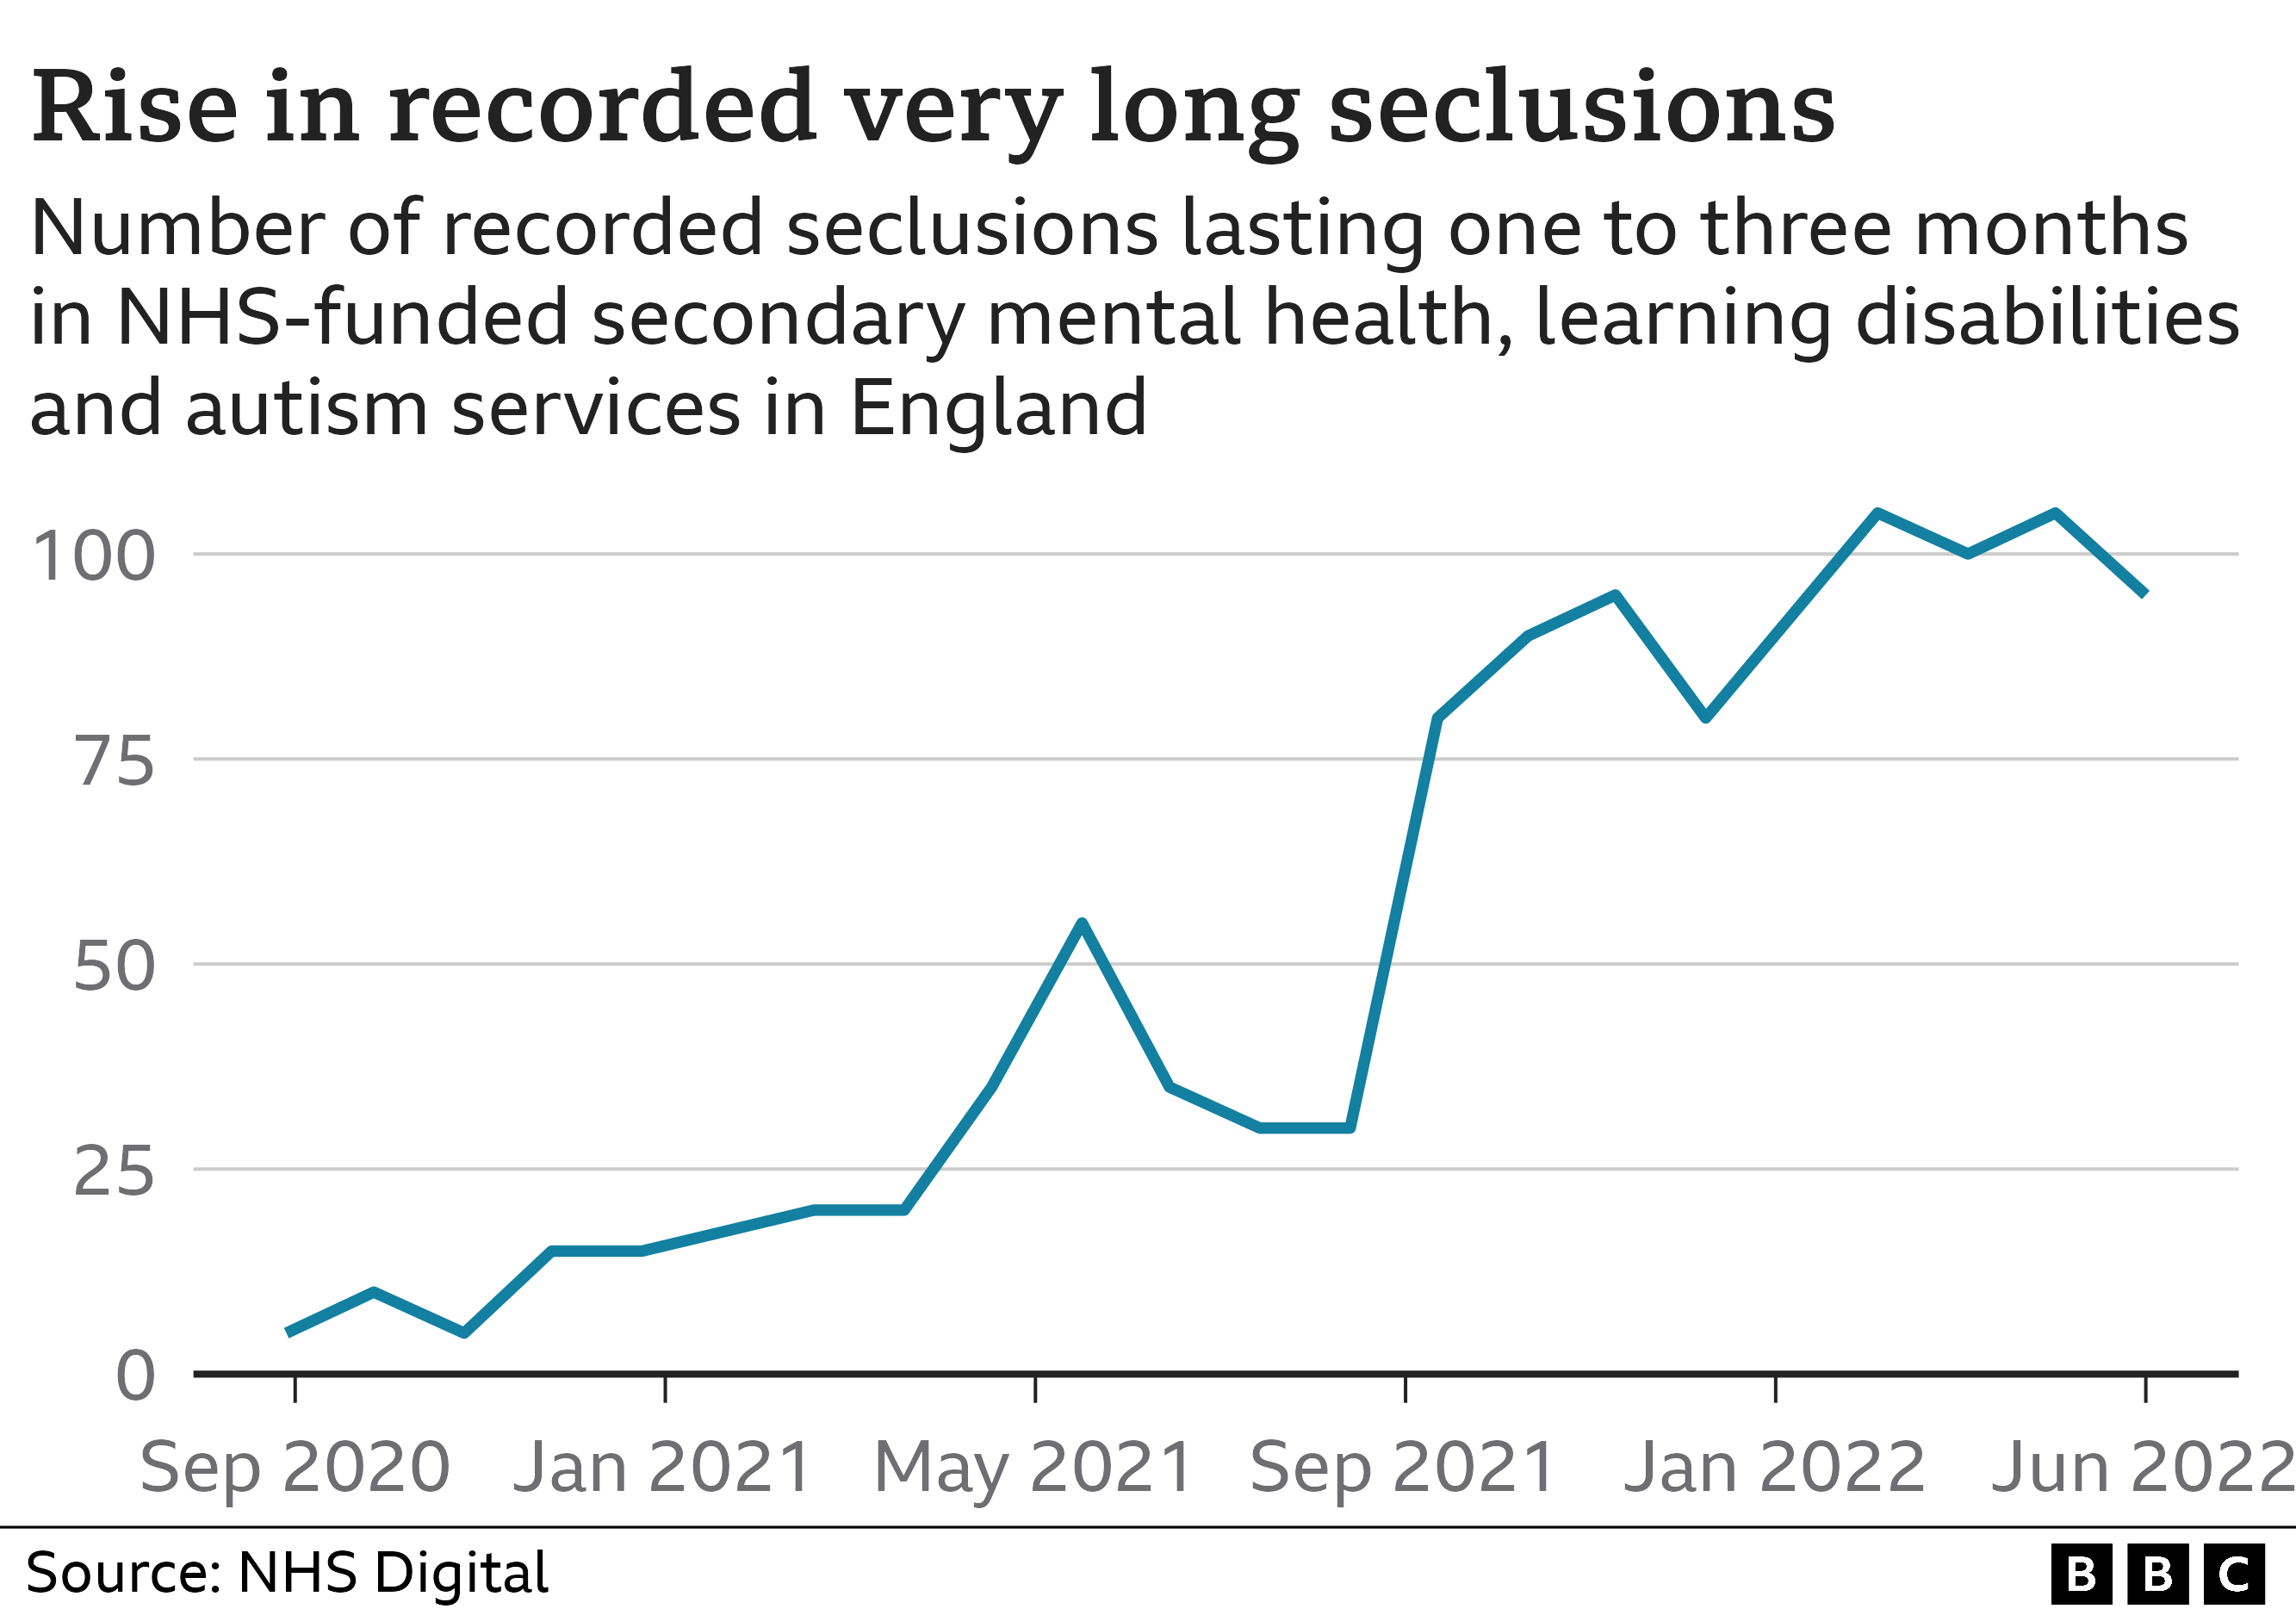 Graph showing the rise in very long seclusions - lasting a month or more - in NHS-funded secondary mental health, learning disabilities and autism services in England.